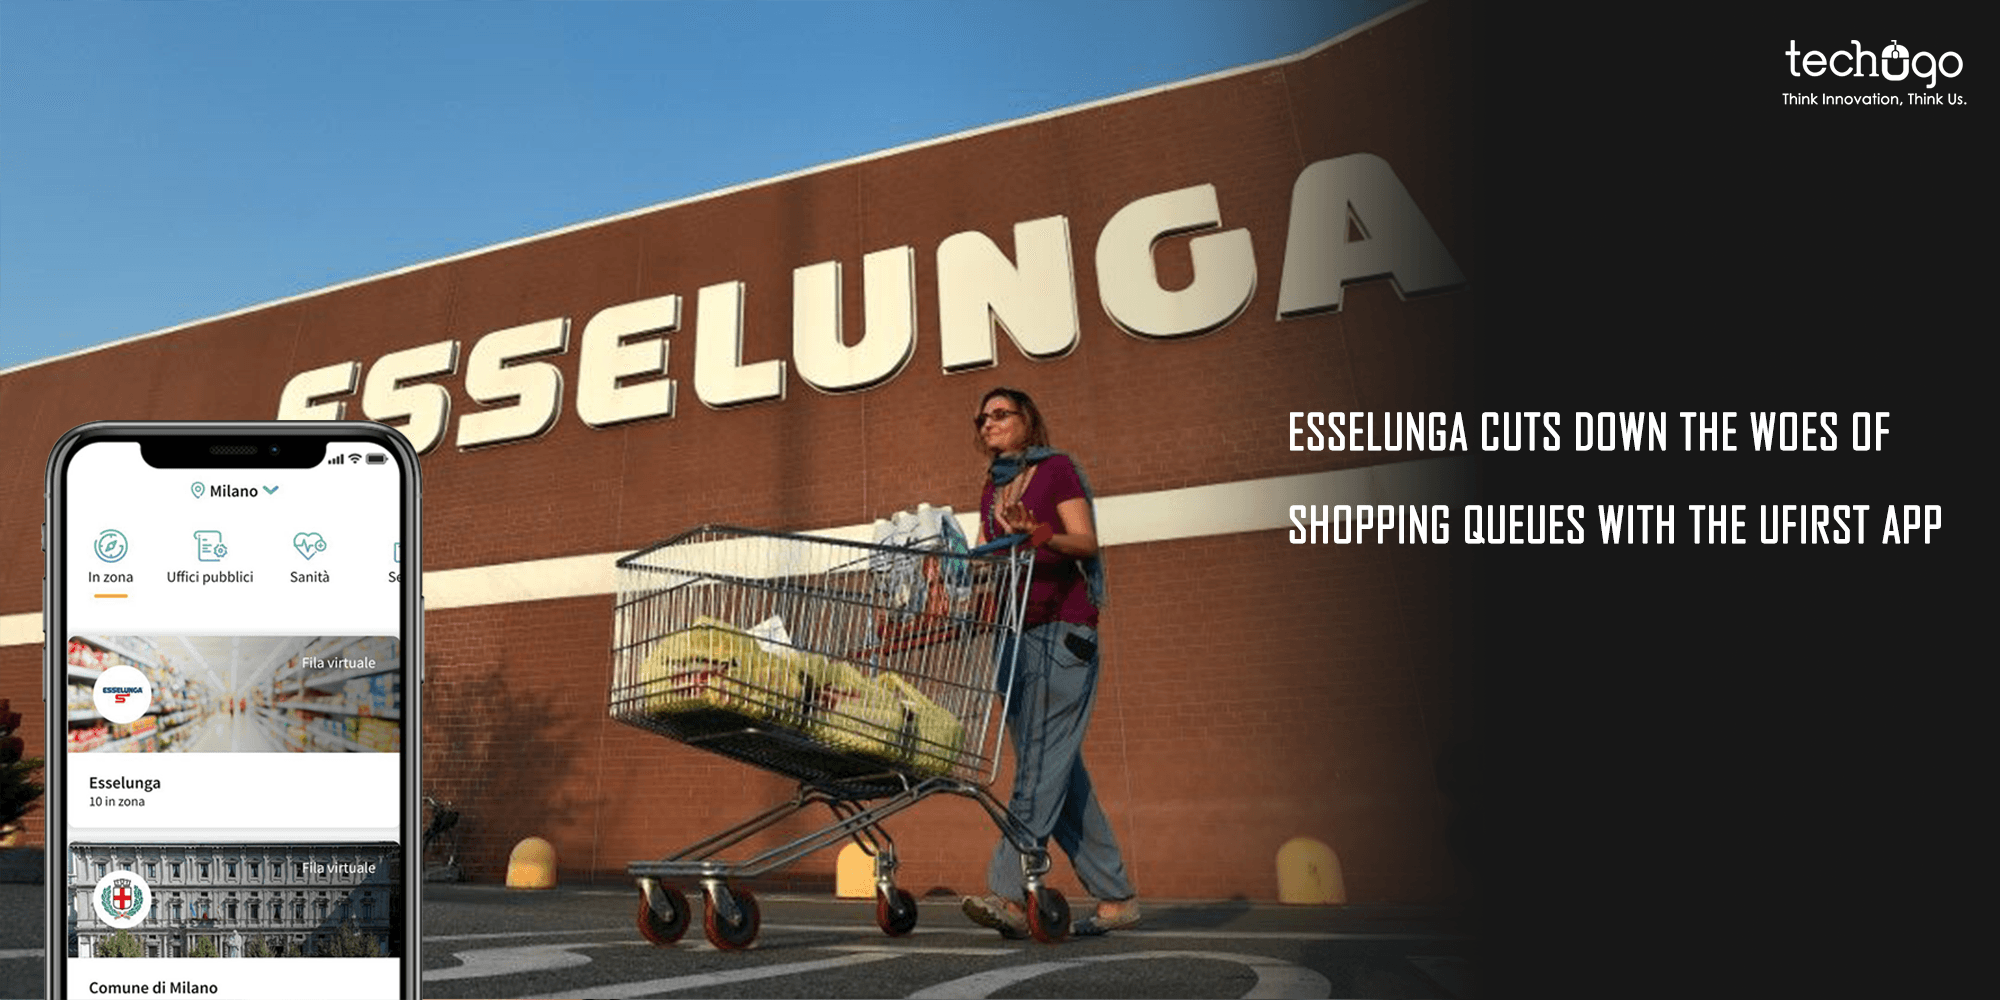 Esselunga Cuts Down The Woes Of Shopping Queues With The Ufirst App